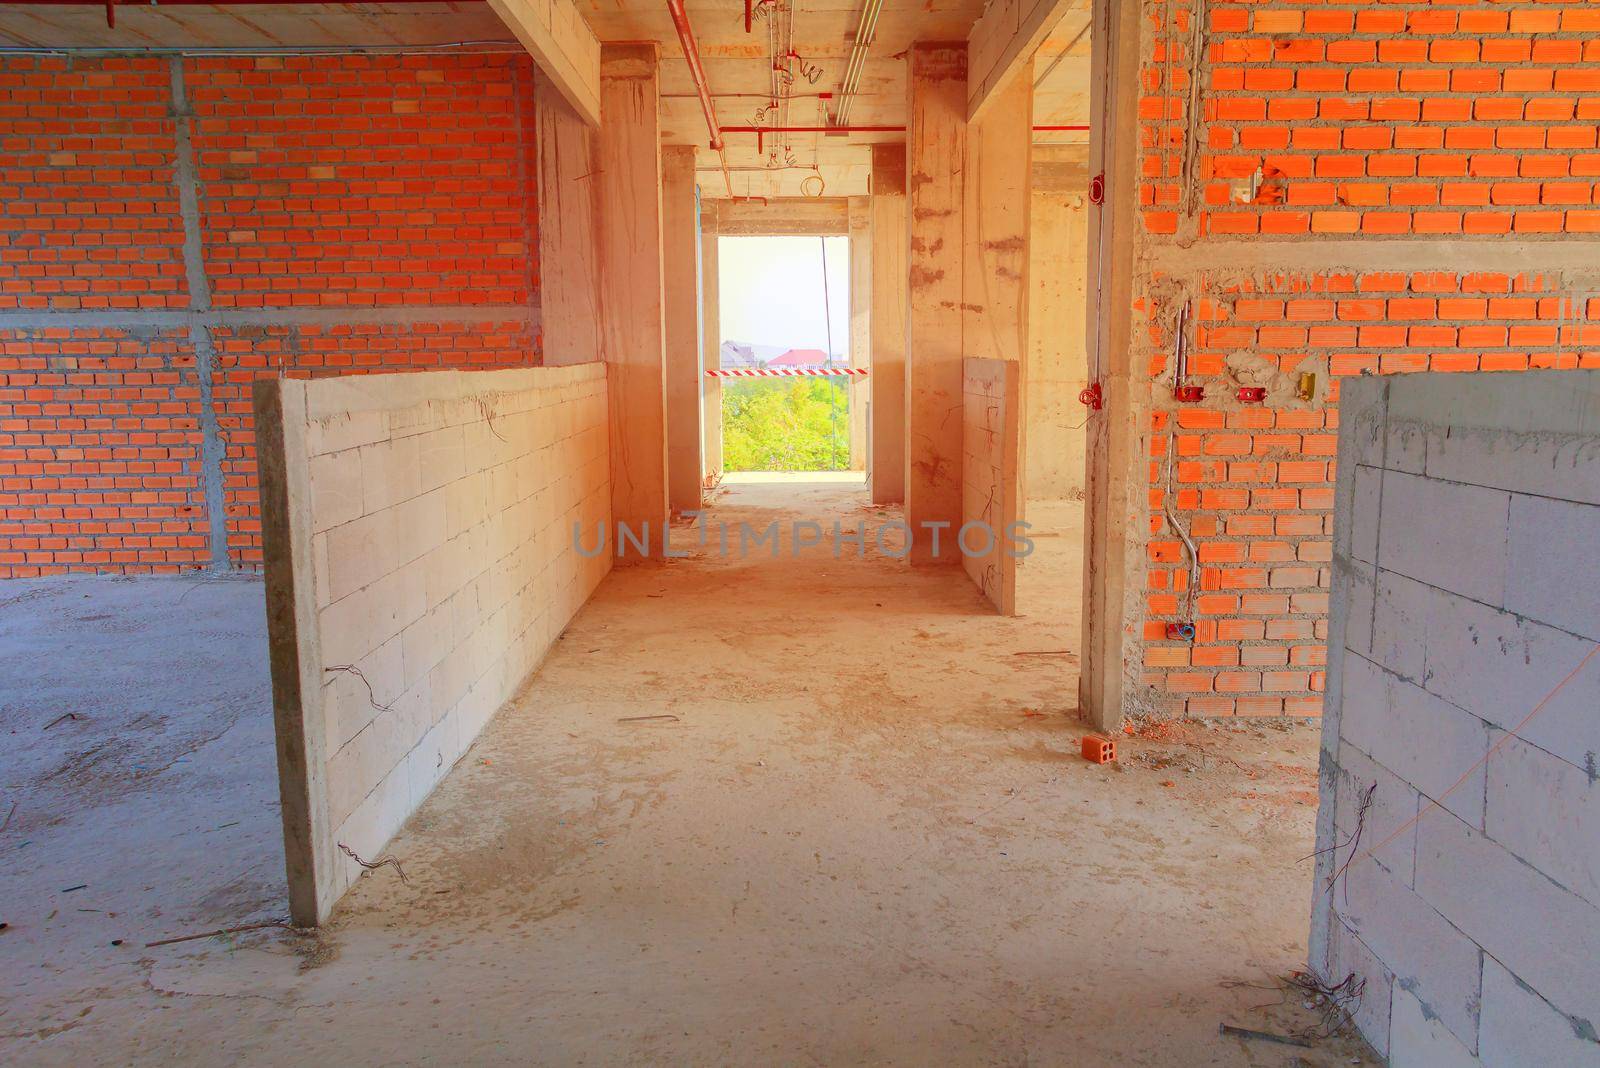 interior in construction and wall decoration at building site with sun light tone